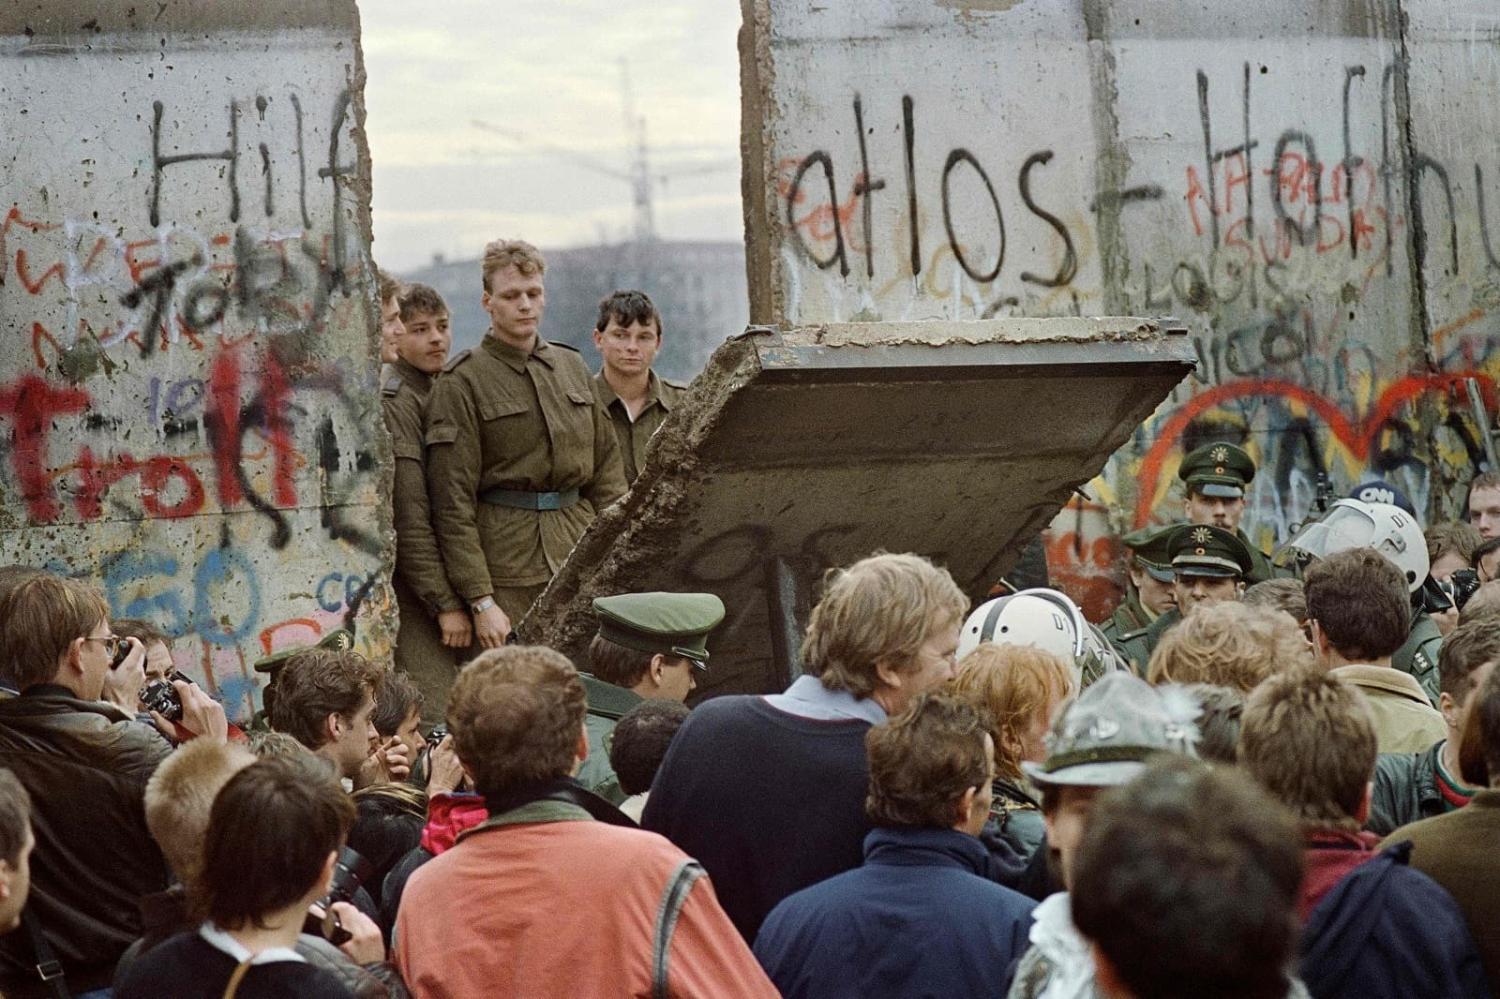 West Berliners gather at the Berlin Wall on 11 November 1989 to watch East German border guards open a crossing point between East and West near Potsdamer Square (Gerard Malie/AFP via Getty Images)